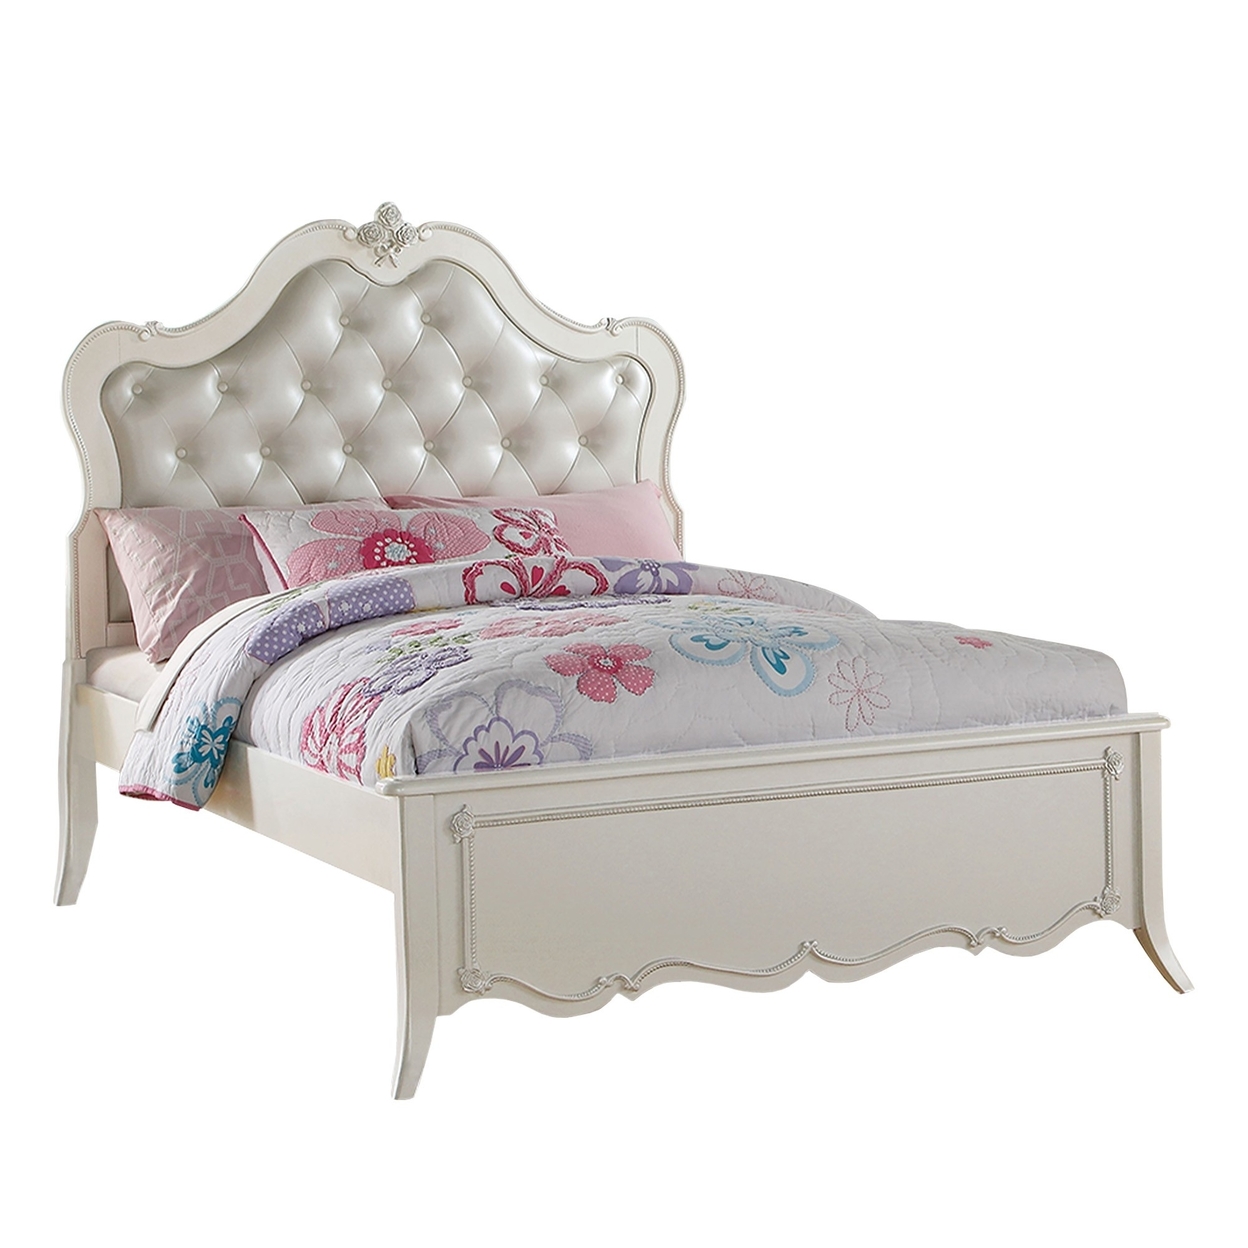 Pine Wood Twin Bed With Button Tufted Headboard, Pearl White- Saltoro Sherpi